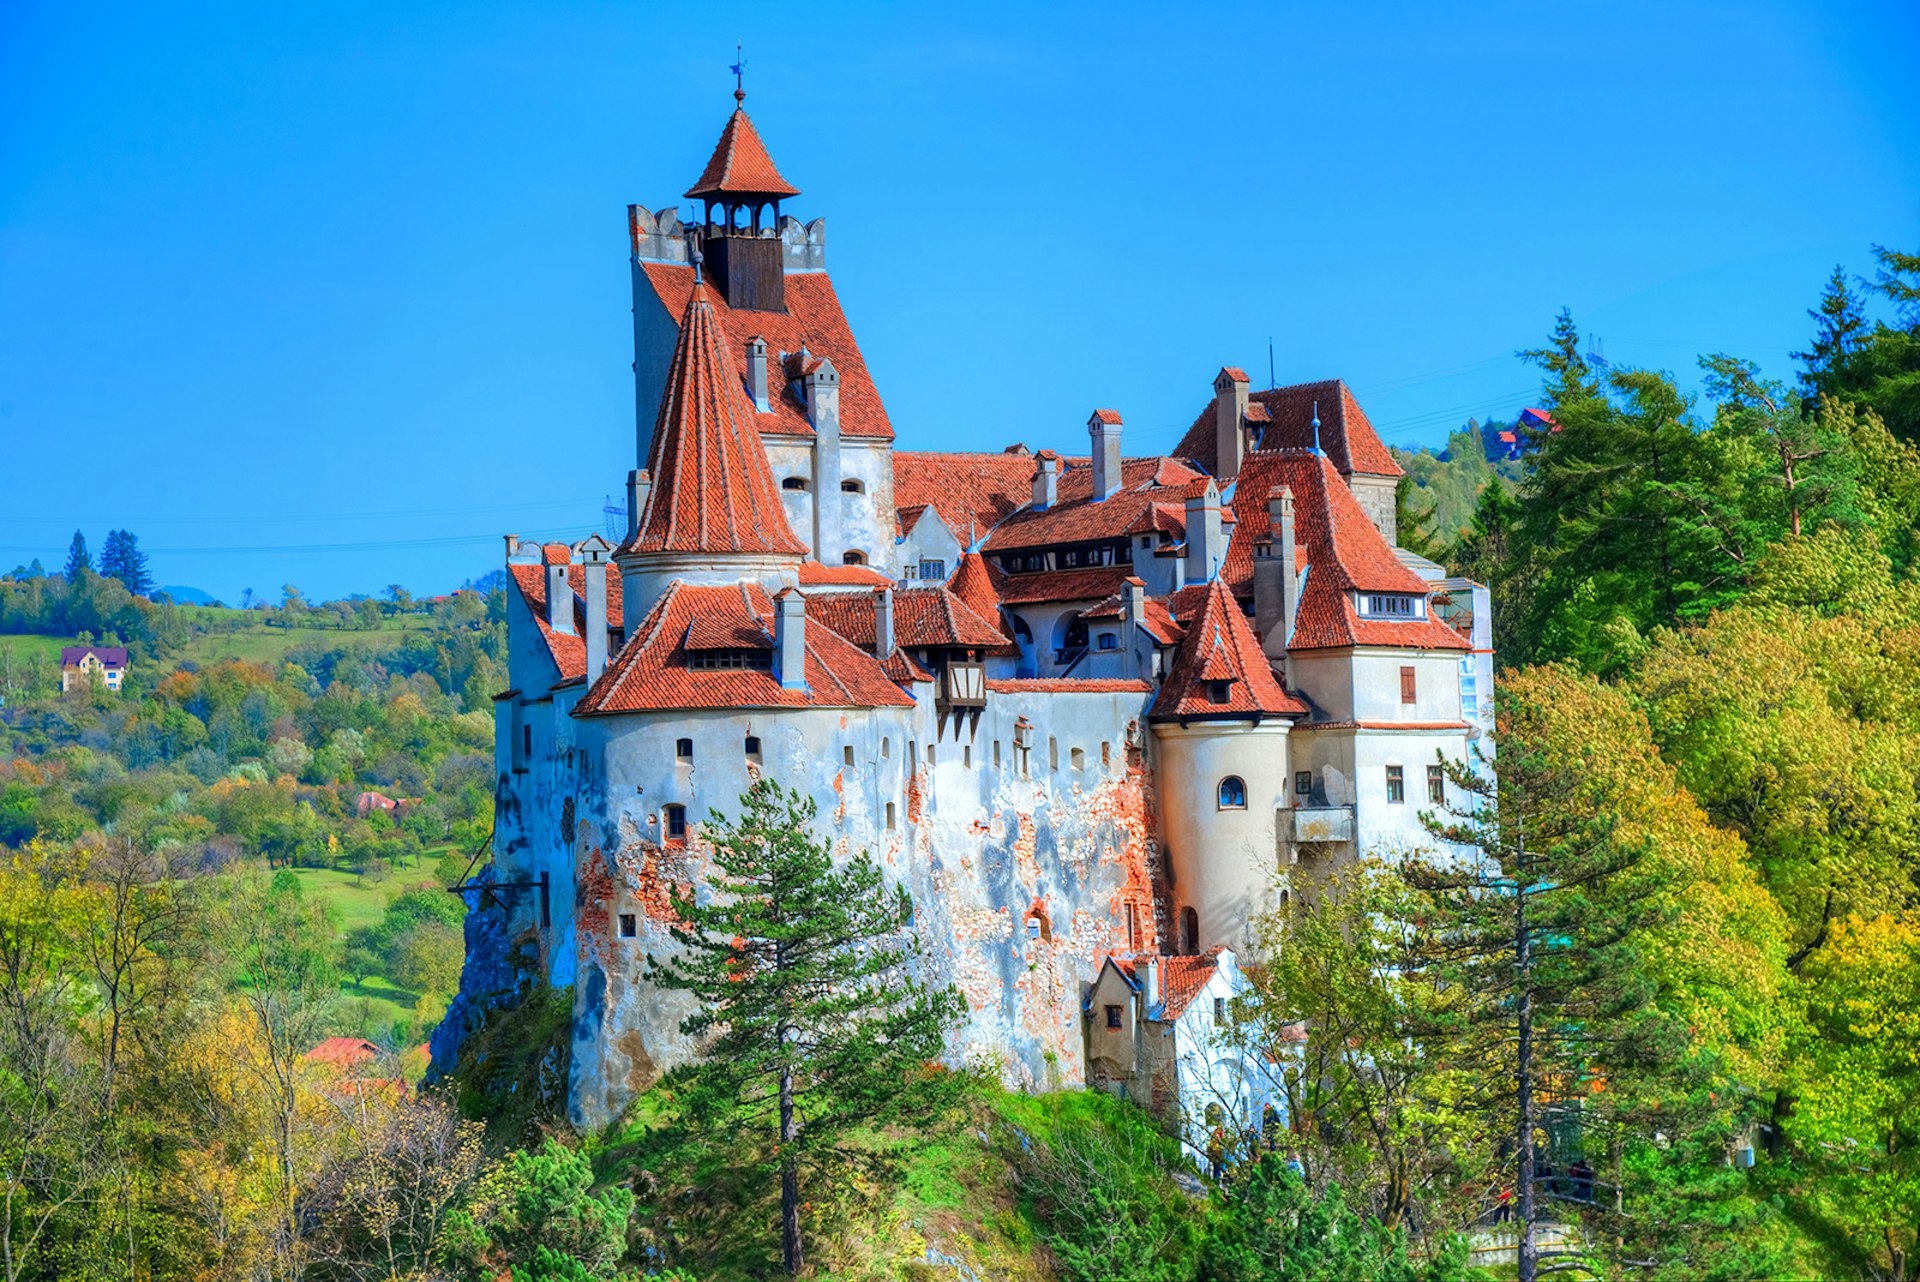 Bran Castle, with its white stone walls and orange roof, stands in the middle of the forest in Transylvania, Romania